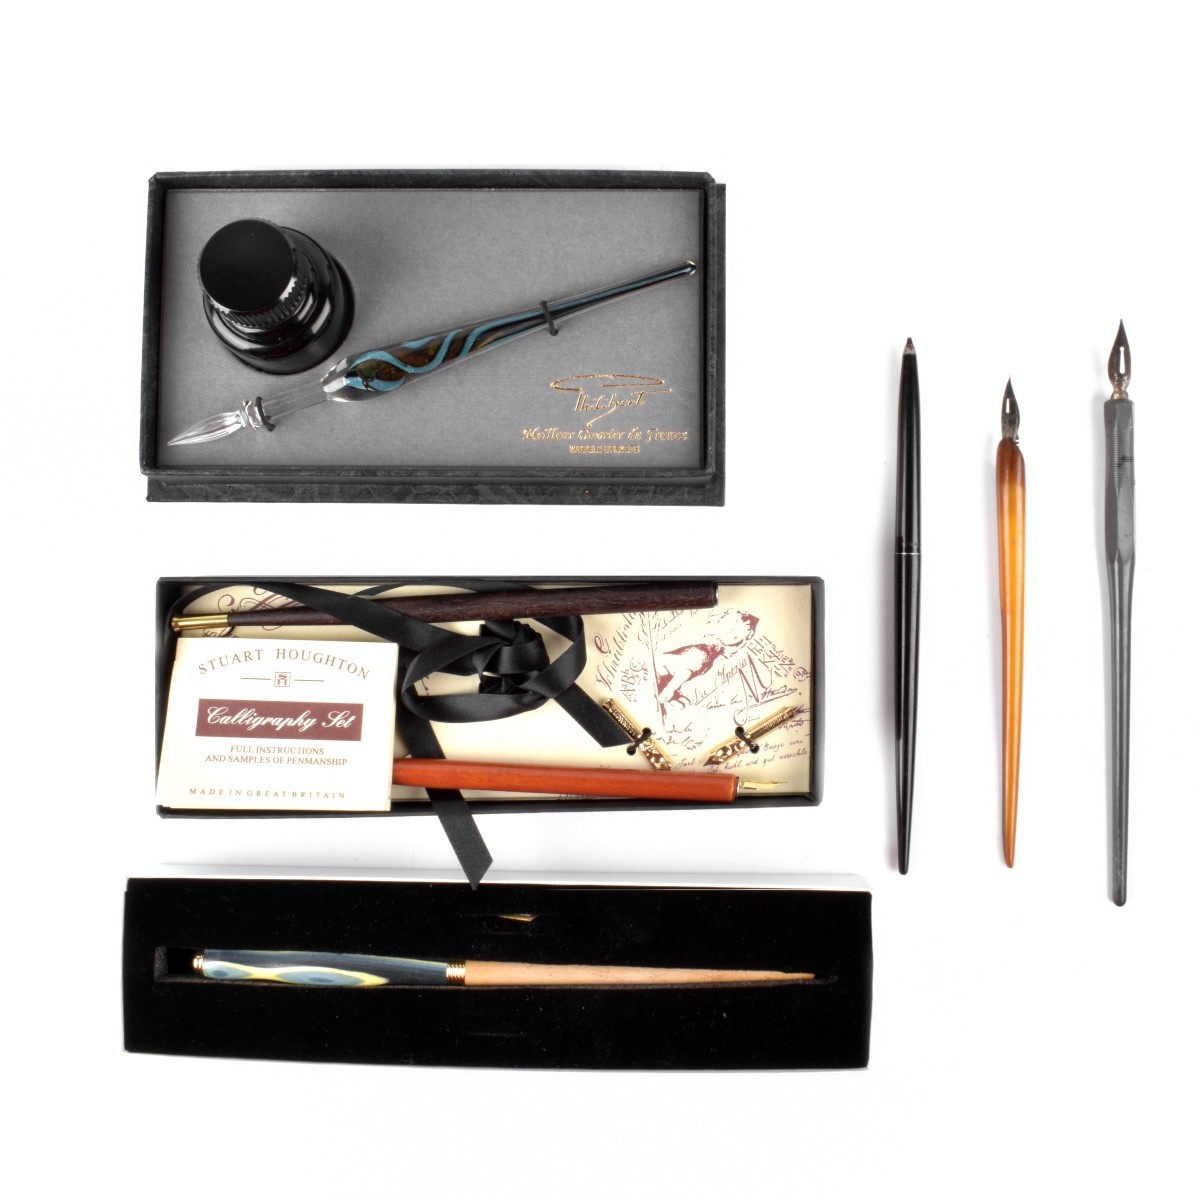 Dip Pens and Calligraphy Set